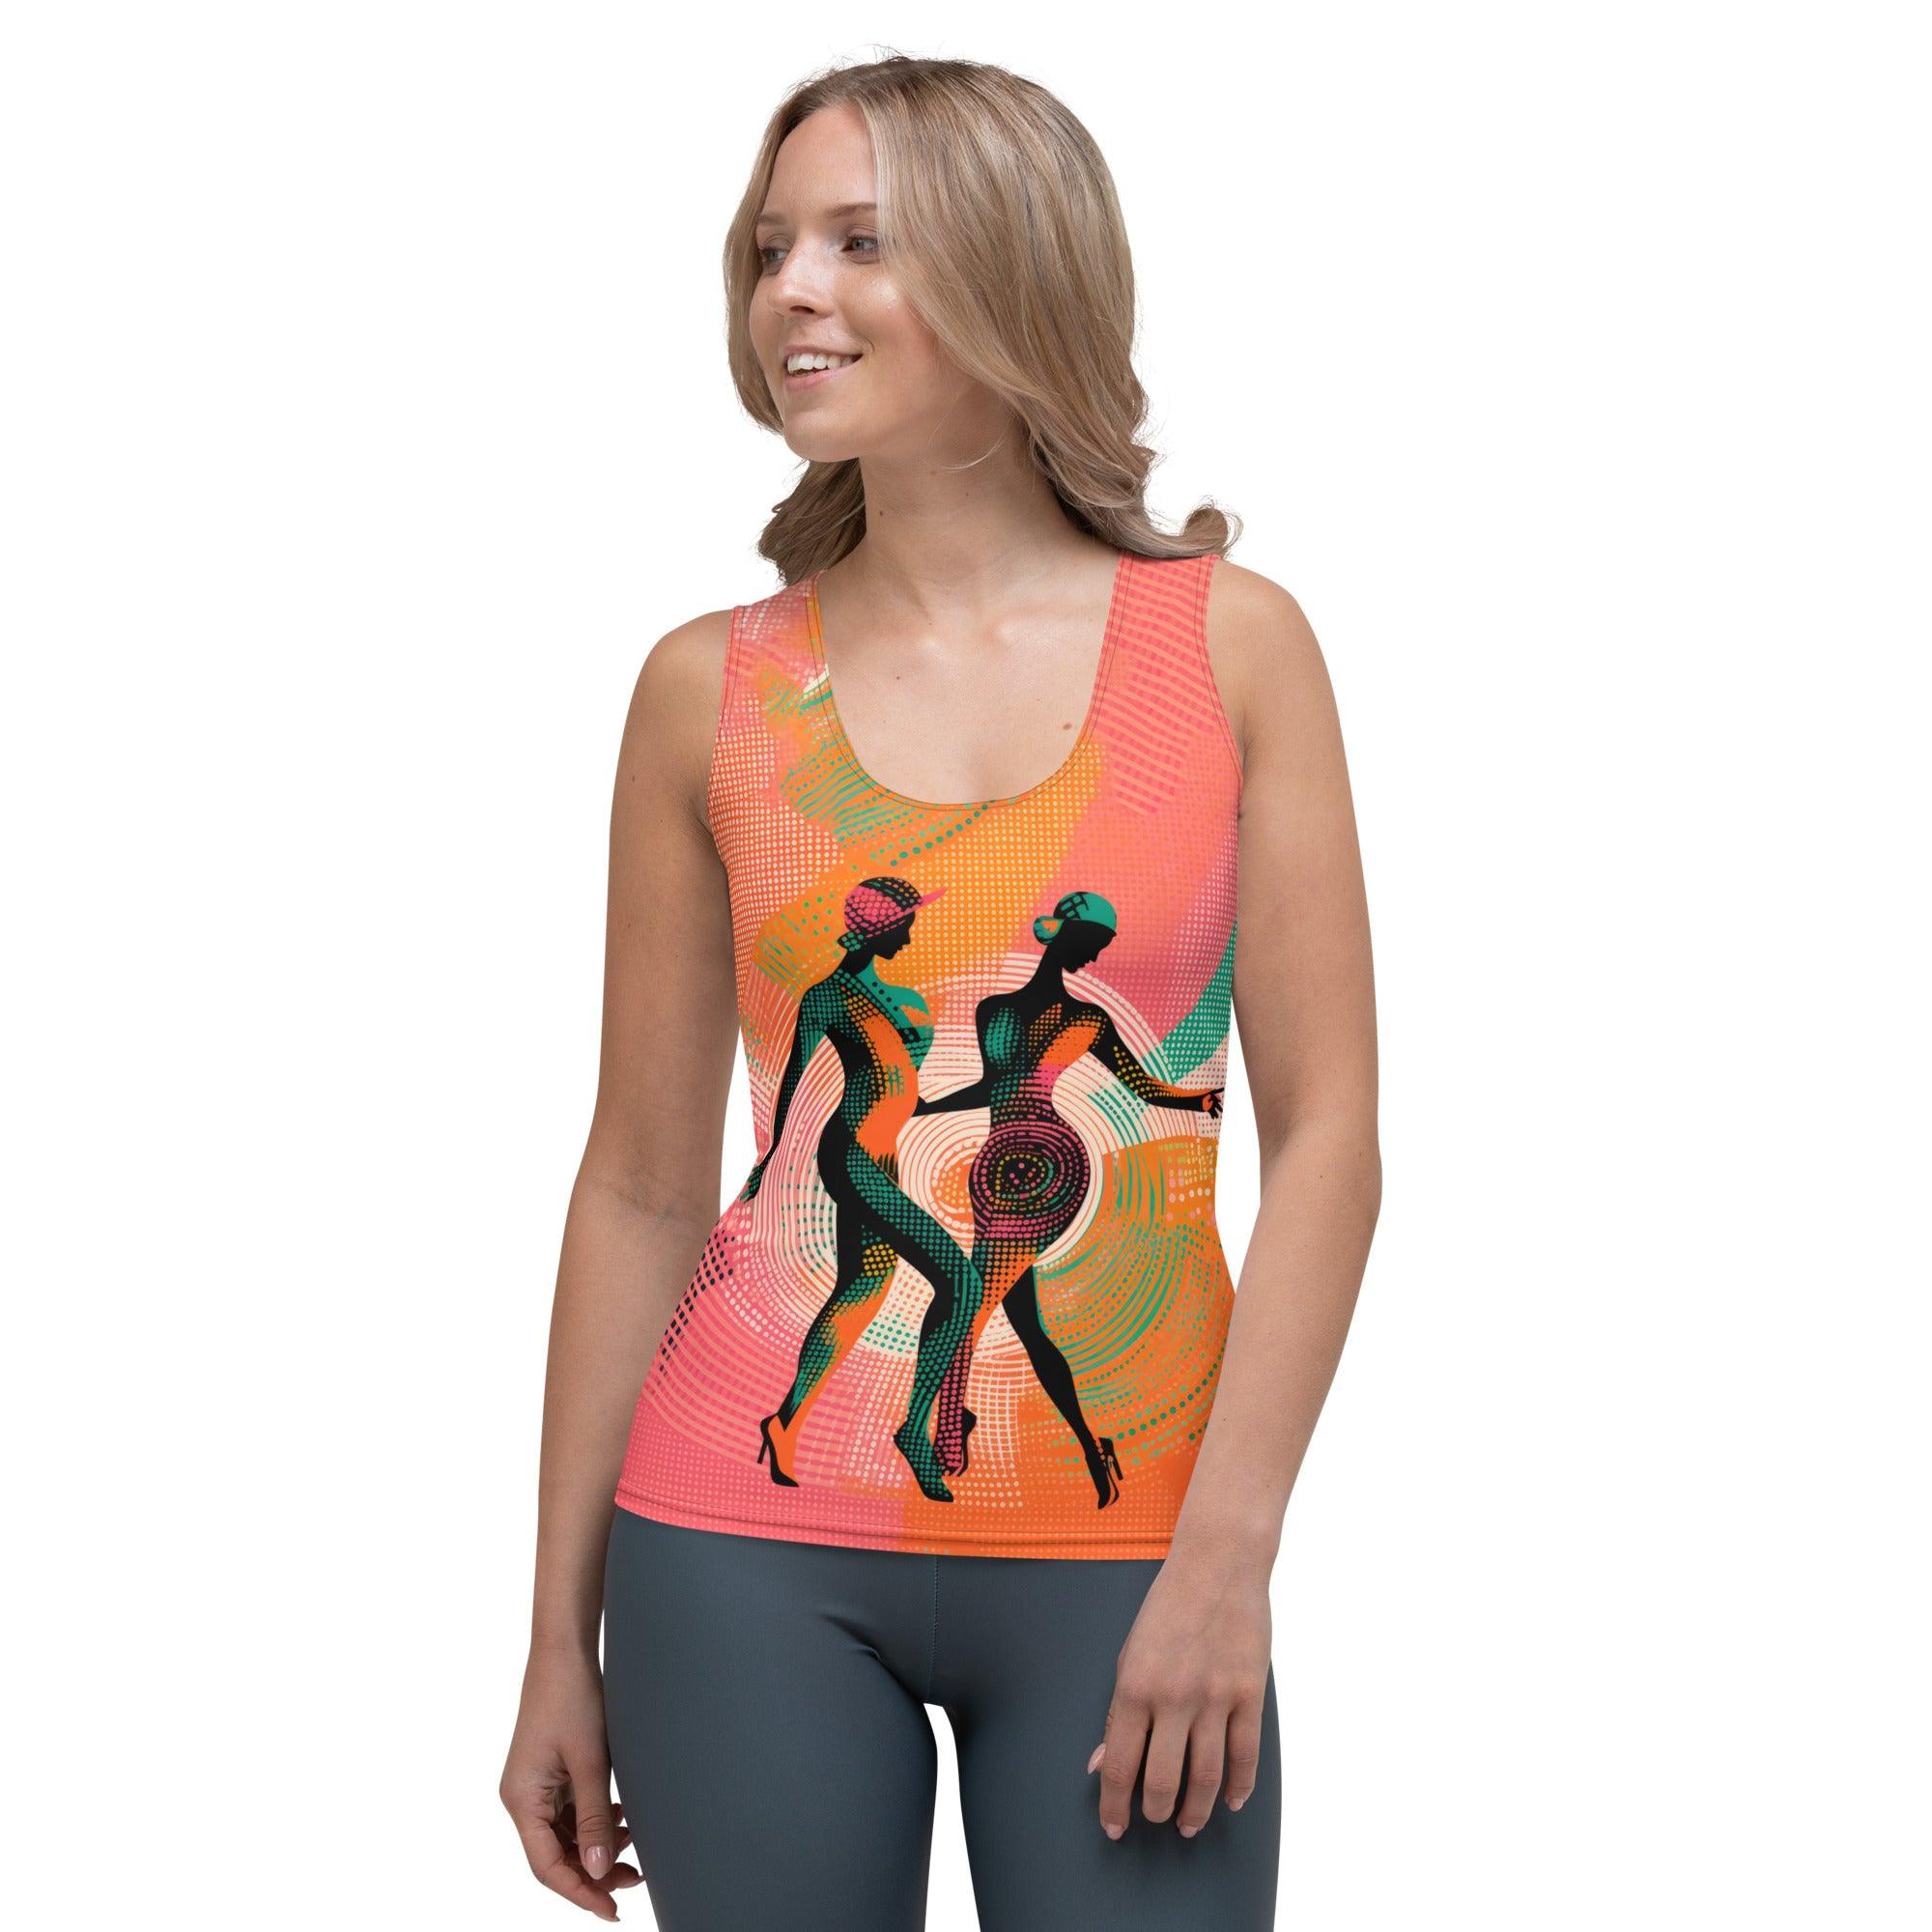 Balletic Extravaganza tank top front view with vibrant sublimation print.